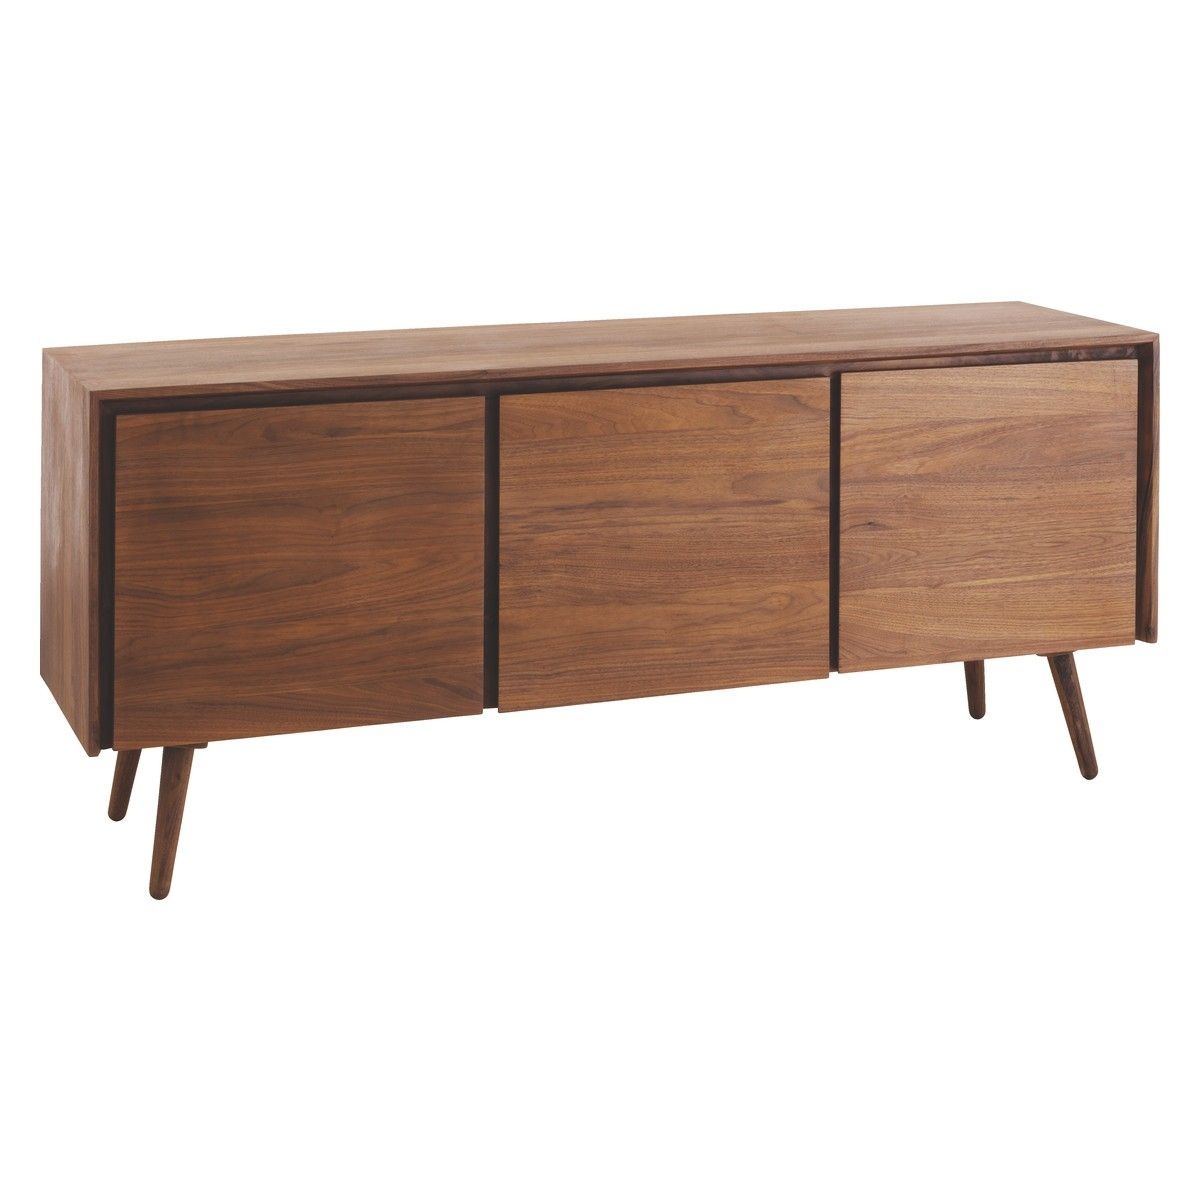 Vince Walnut 3 Door Mid Century Sideboard | Buy Now At Habitat Uk Pertaining To Best And Newest Walnut Finish 2 Door/3 Drawer Sideboards (View 8 of 20)